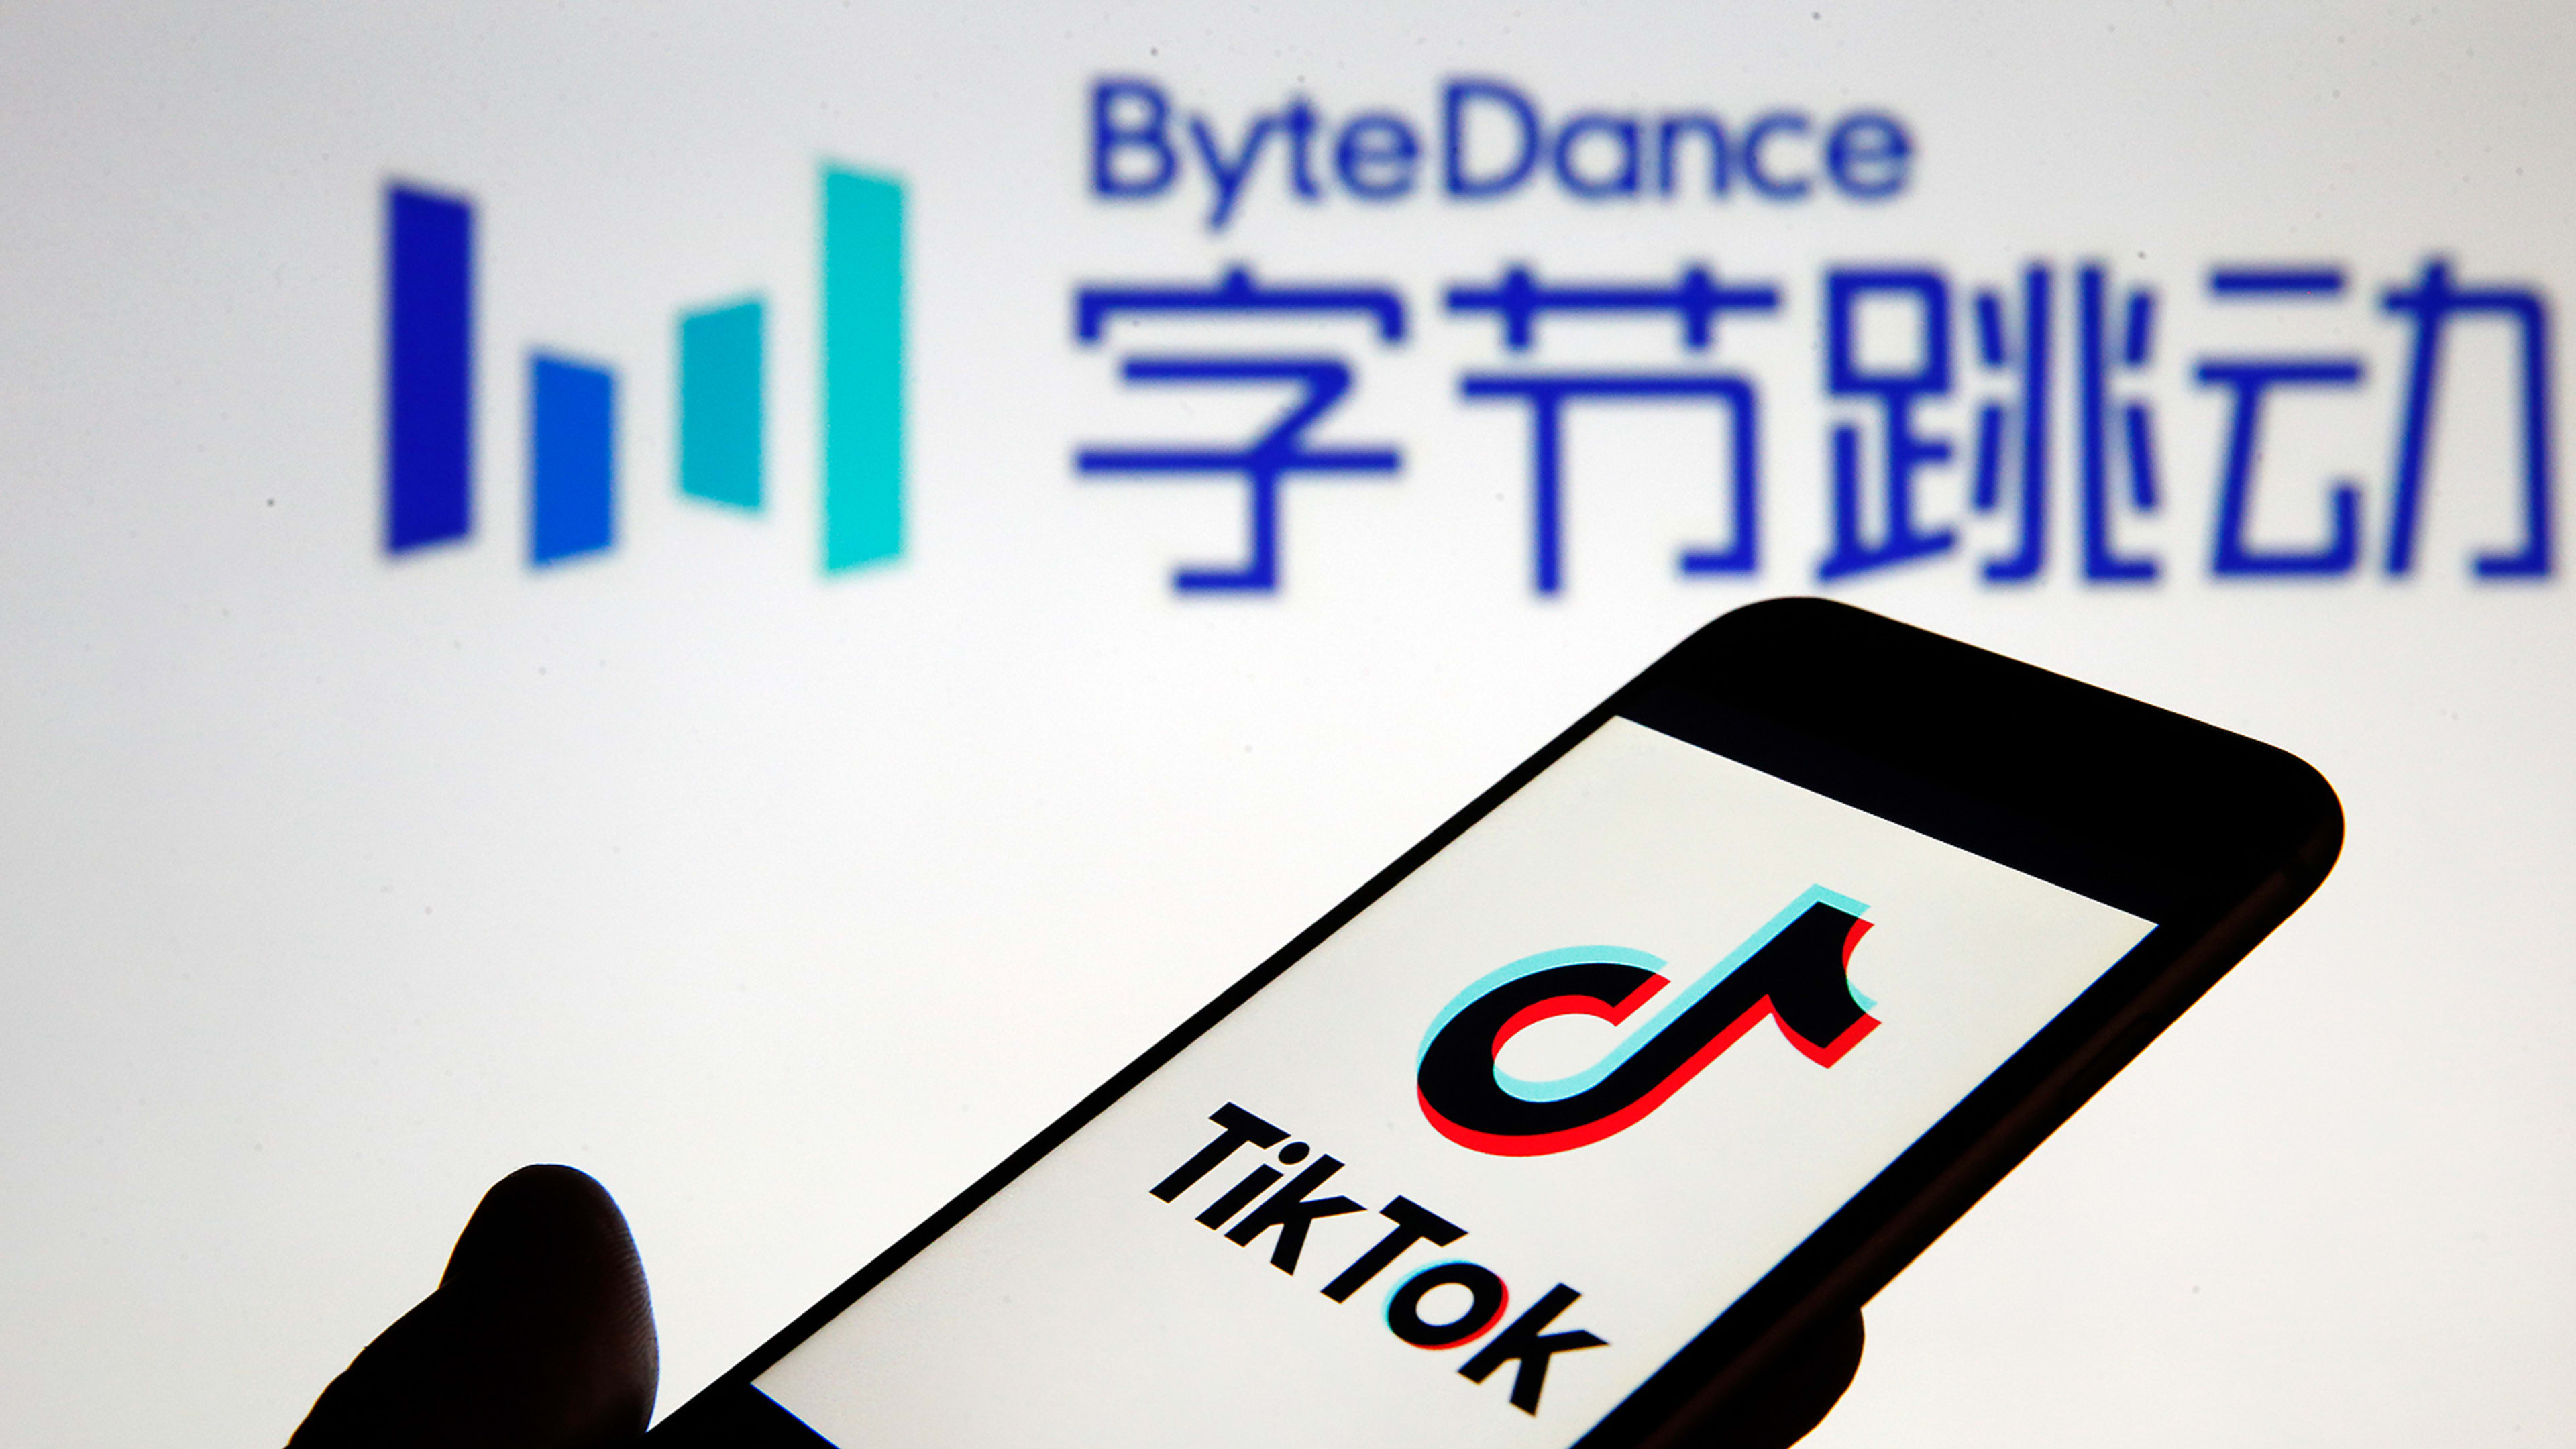 TikTok may be banned in India, but this ByteDance app is having a moment there